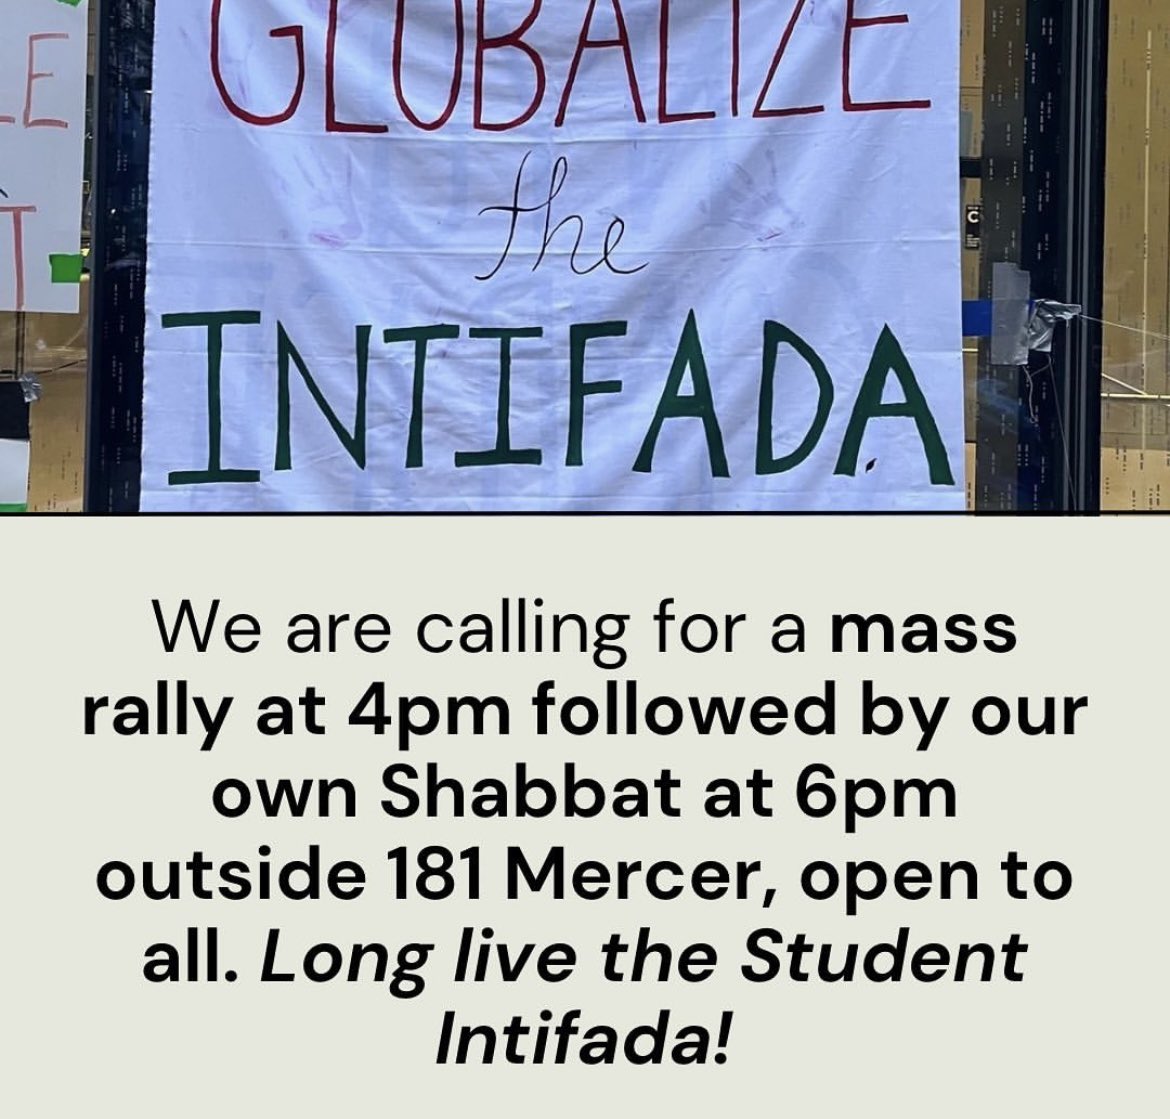 Tonight is a new low for the anti-Israel group at NYU: They’re excitedly protesting timed to heckle people heading to Shabbat services. Sorry, I mean hosting “their own Shabbat” and calling for intifada. NYU’s Jewish community does not deserve this.